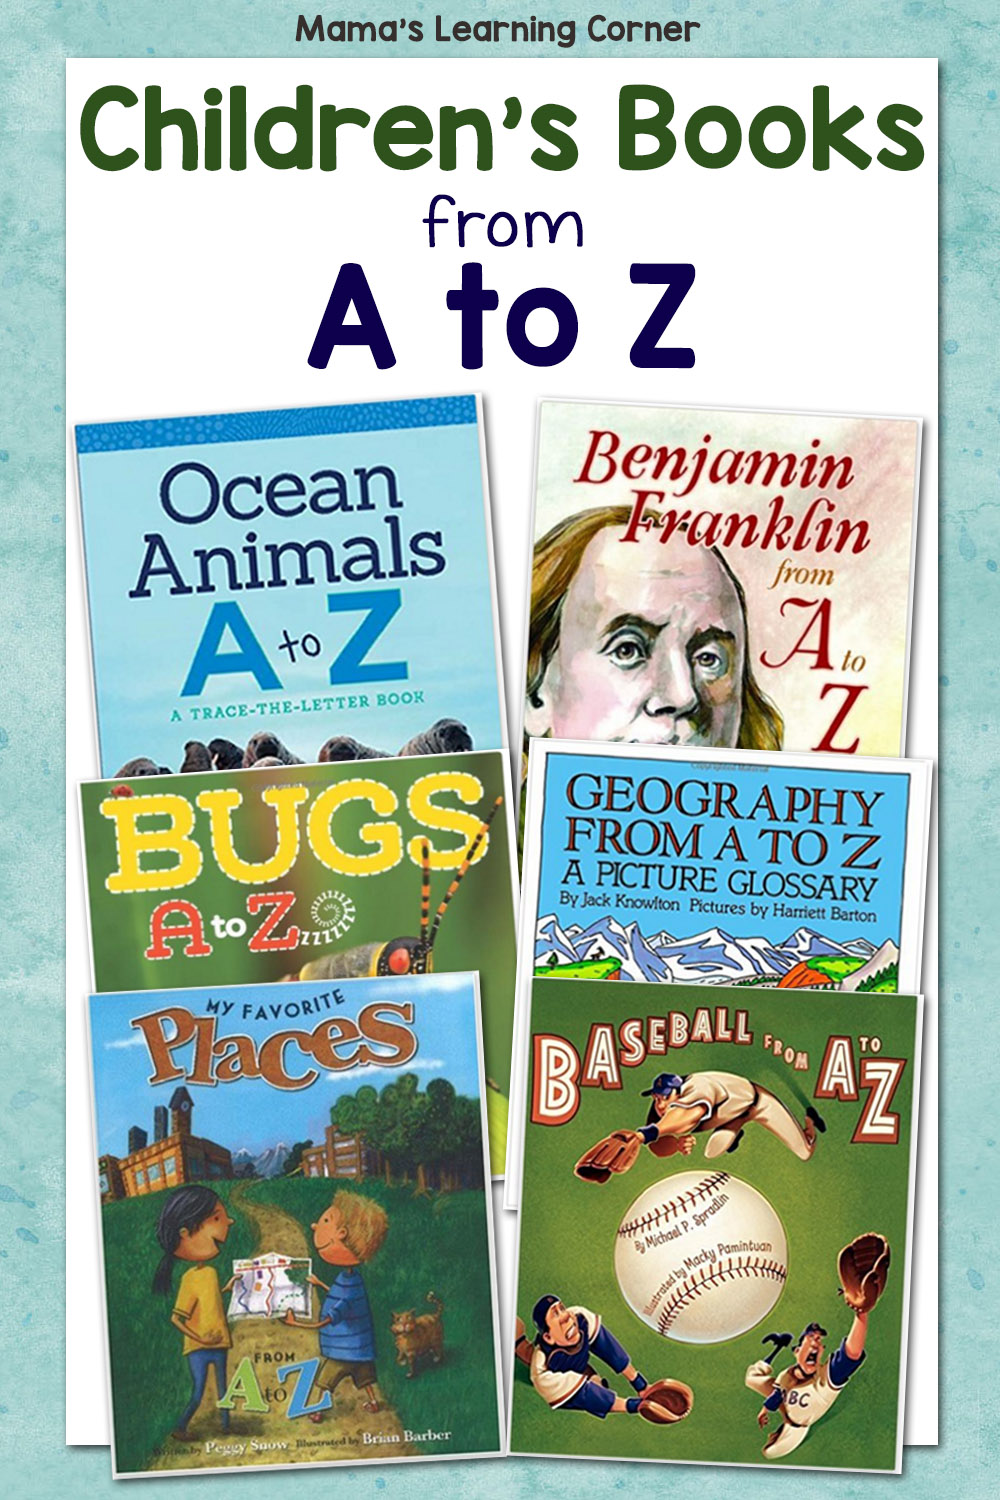 Children's Books from A to Z - 65+ books! - Mamas Learning Corner